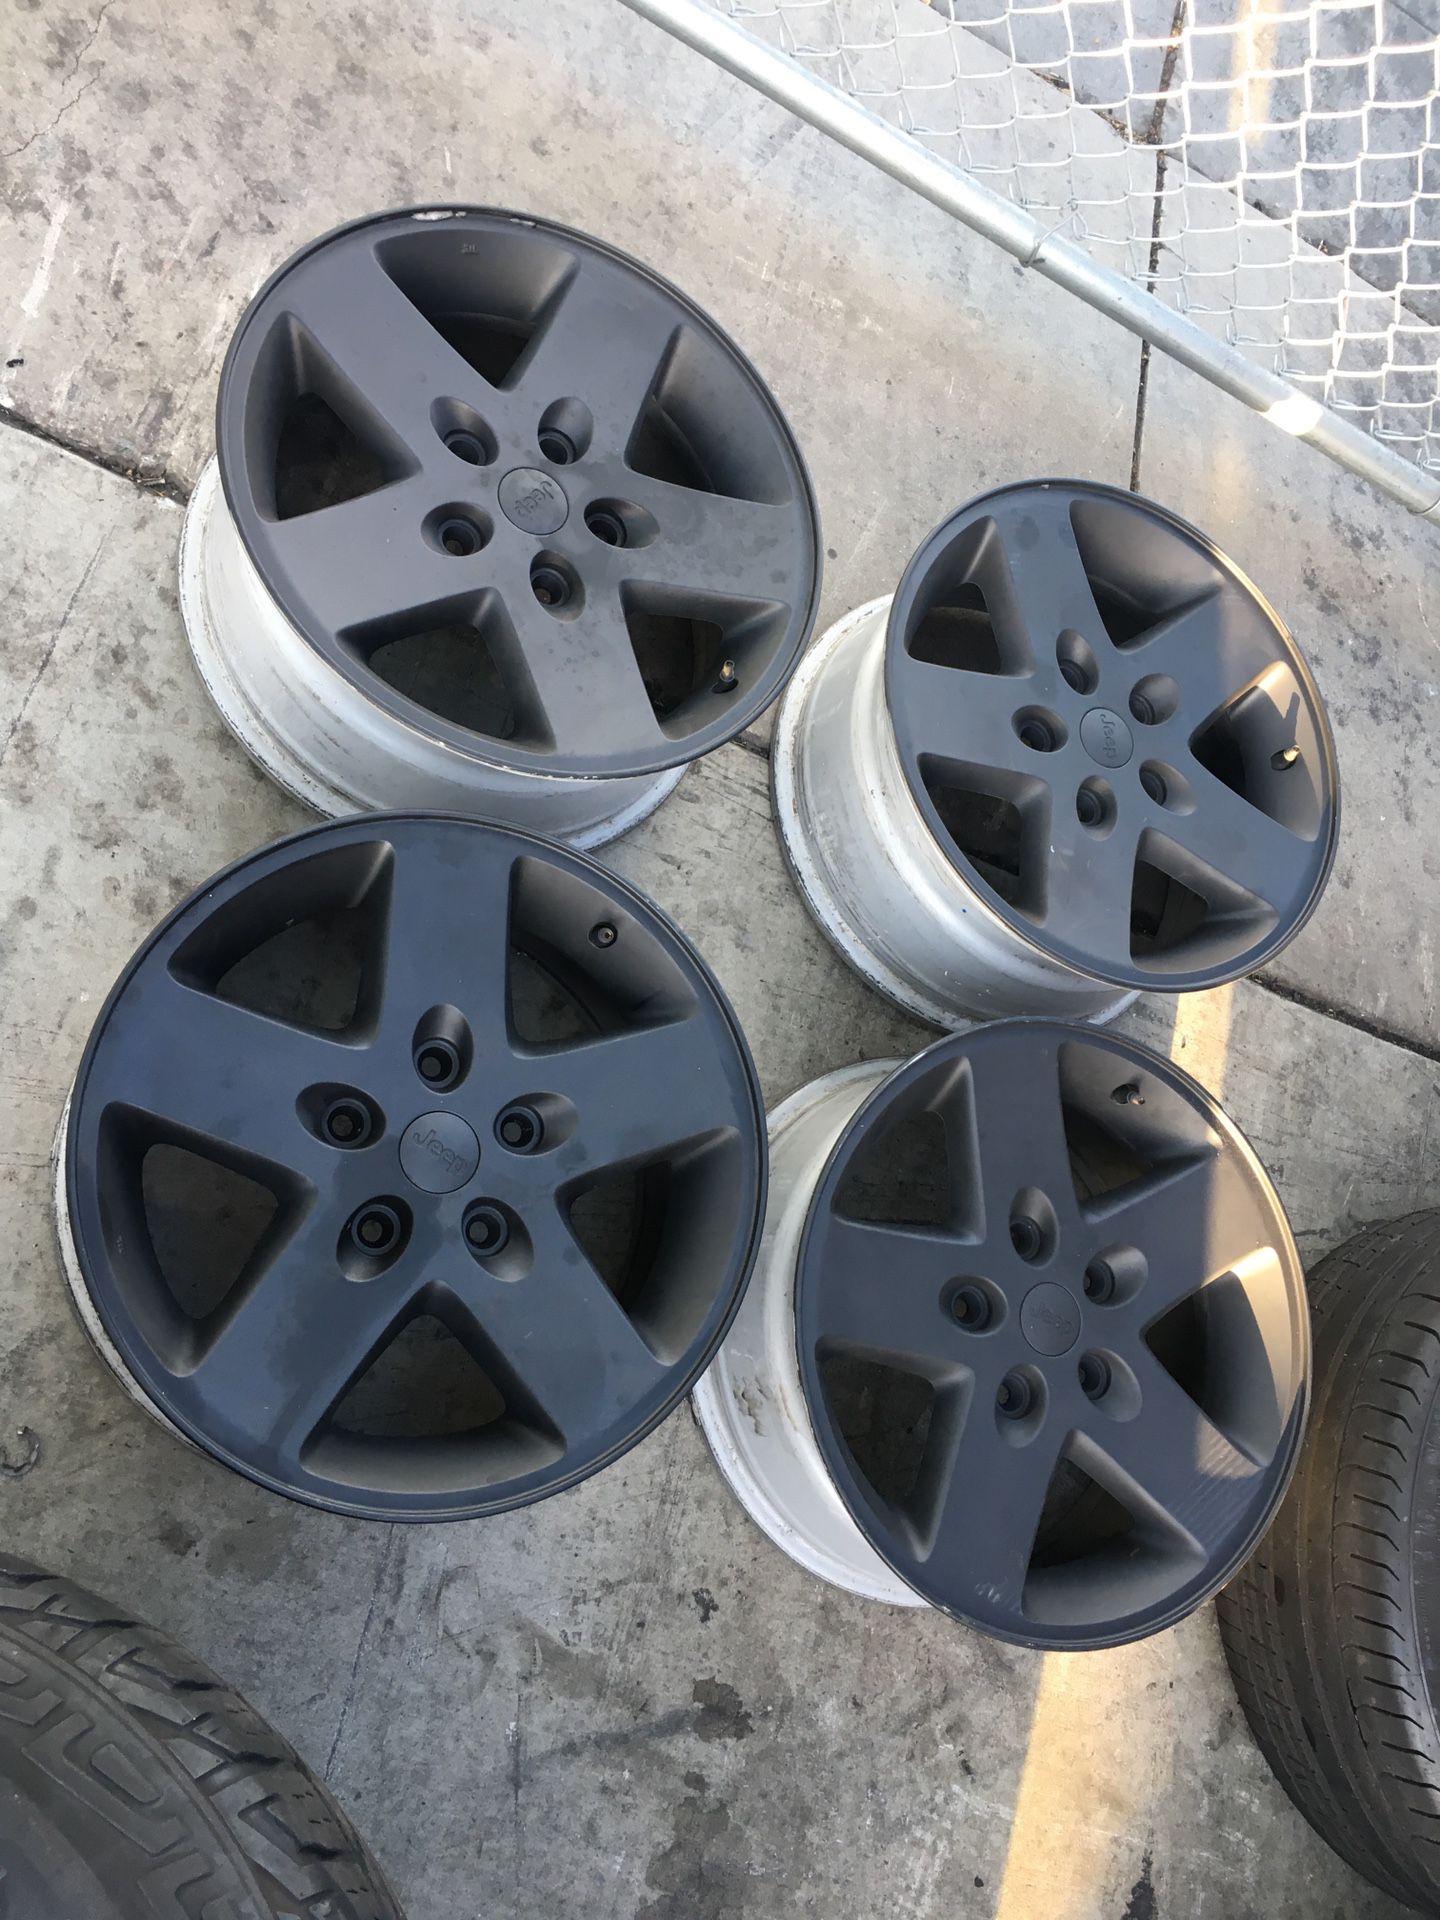 Used Jeep Oem rims side 17” no tires